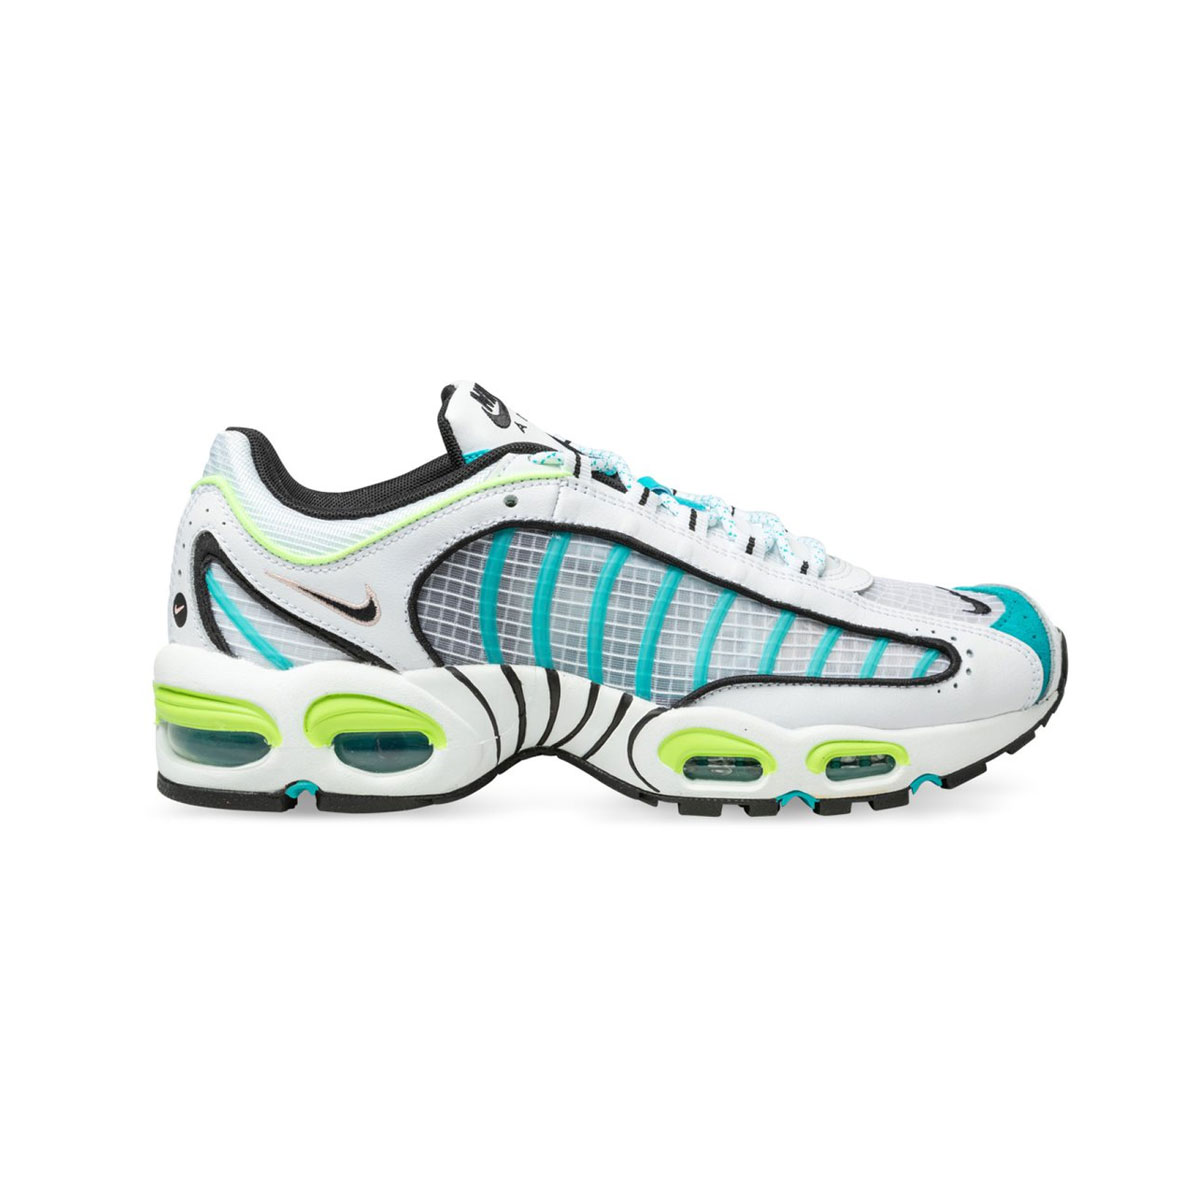 Nike Air Max Tailwind 4 Iv Se Transparent Teal Neon Running Shoes Cj0641 100 New Ebay